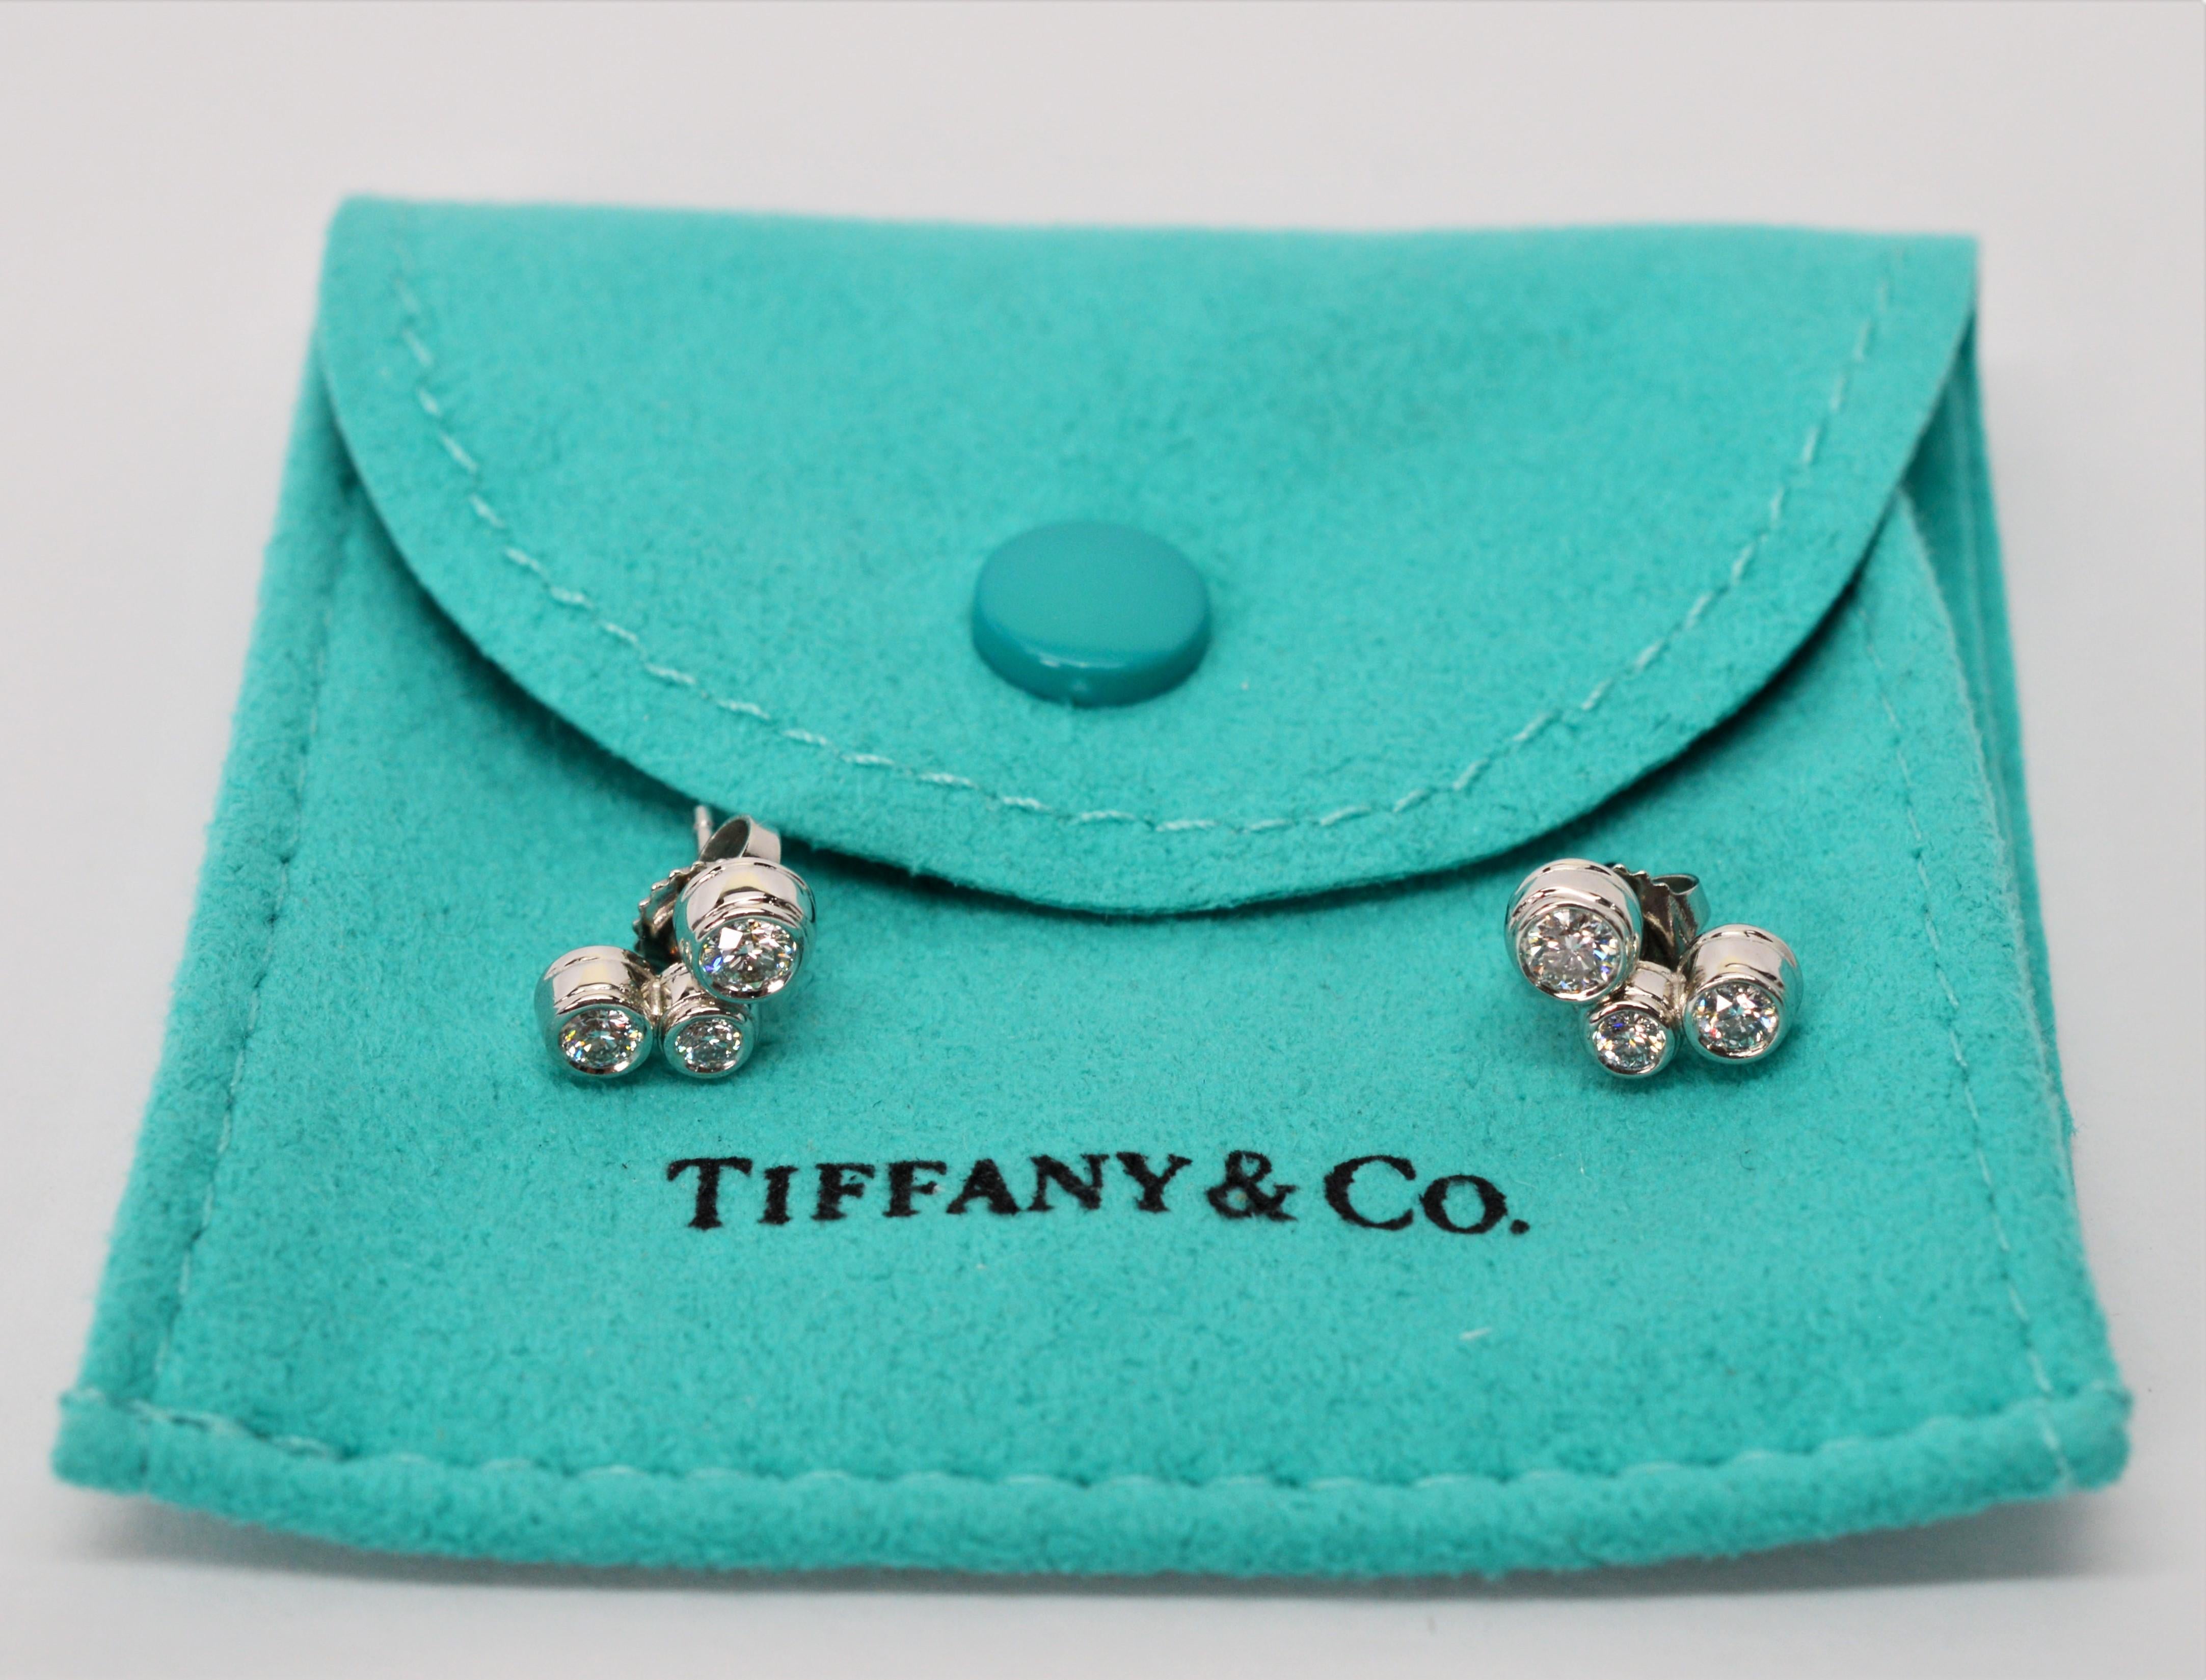 New, with Tiffany & Co. signature pouch. Tiffany & co. 